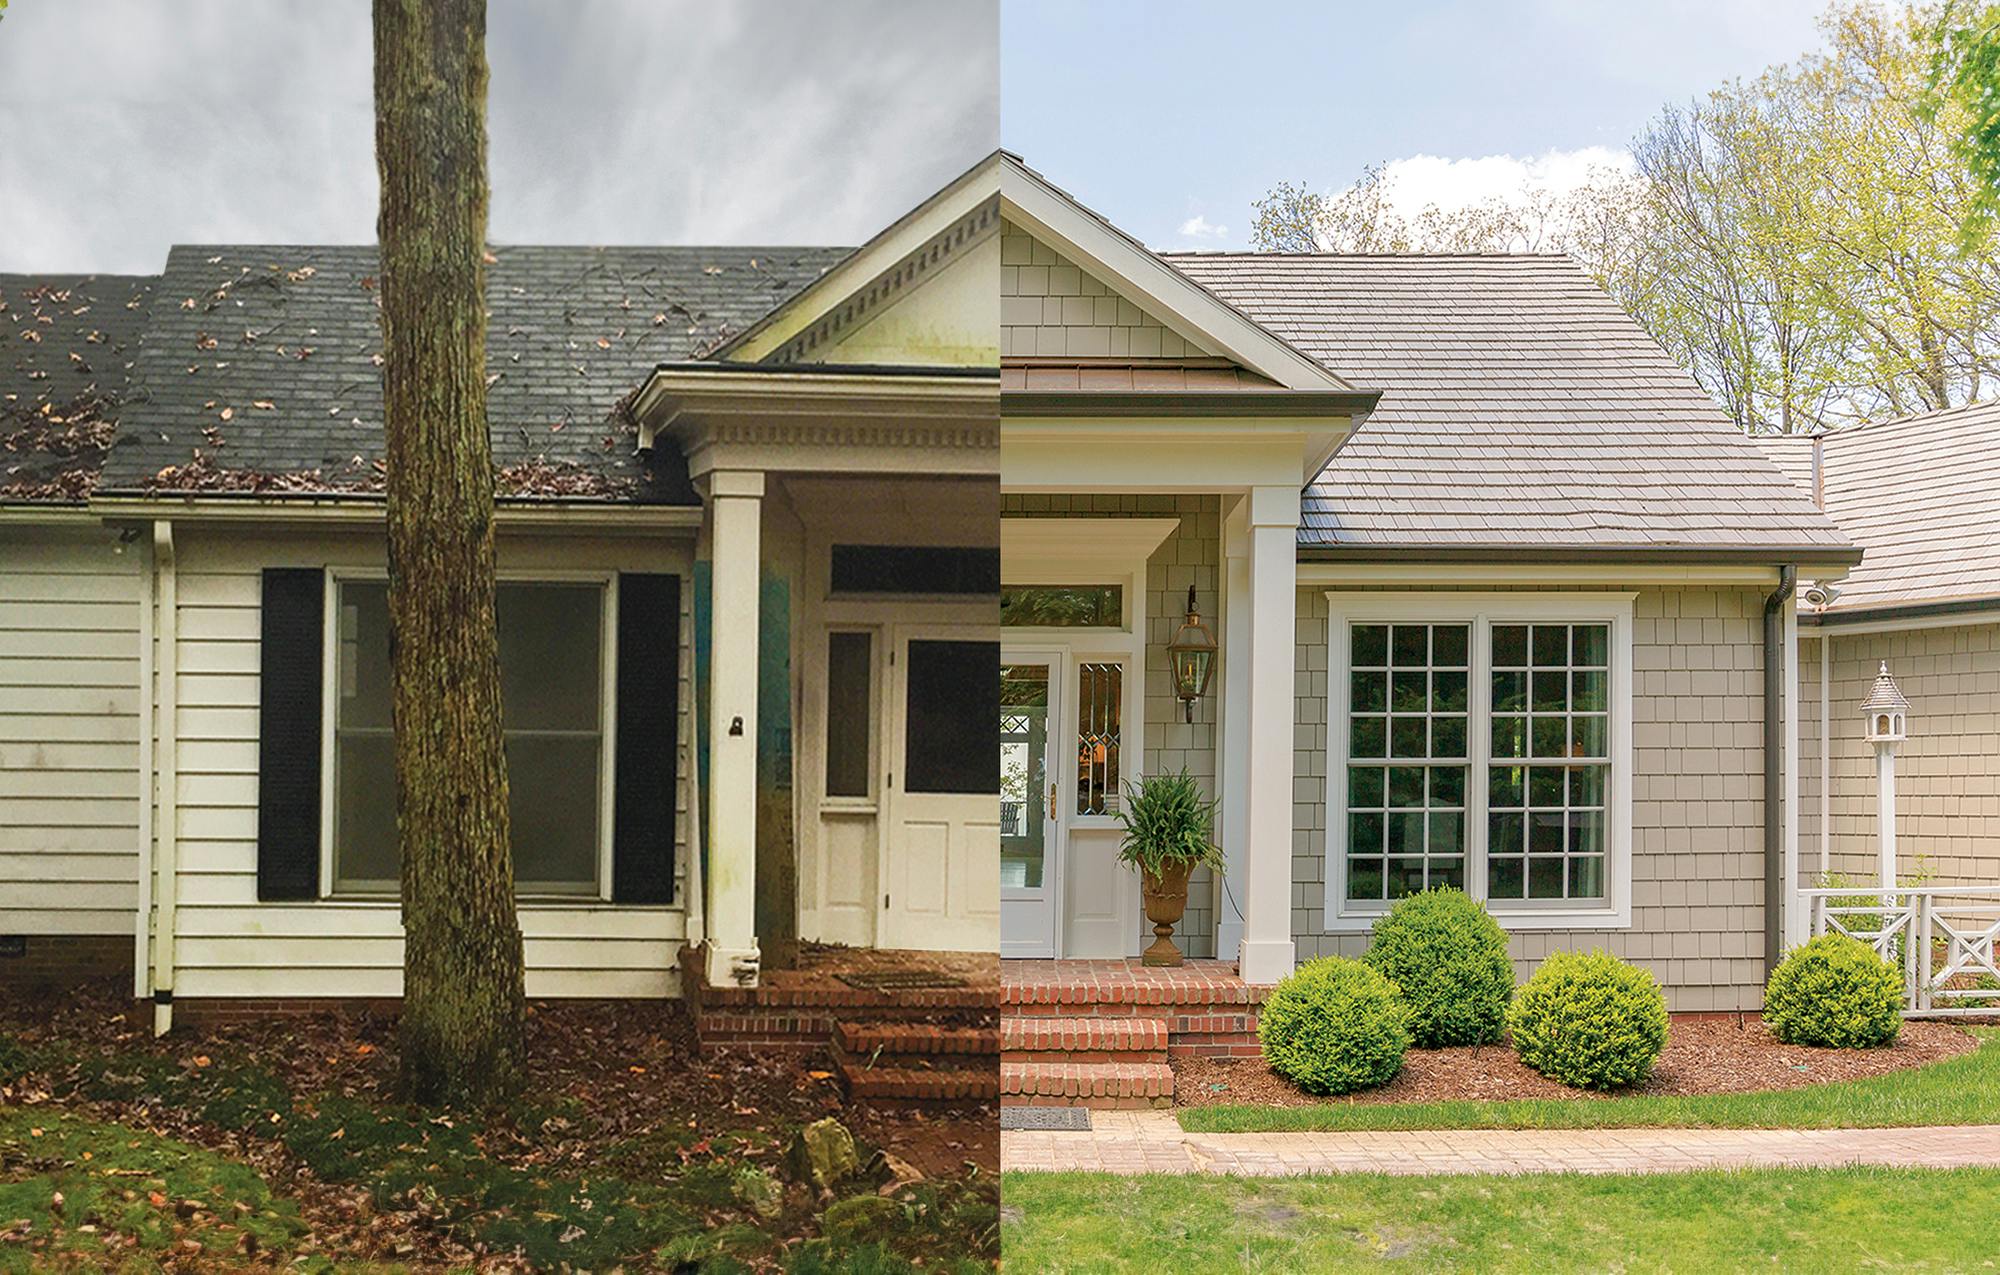 Before and after comparison of a home with old siding vs new, Hardie shingle siding 